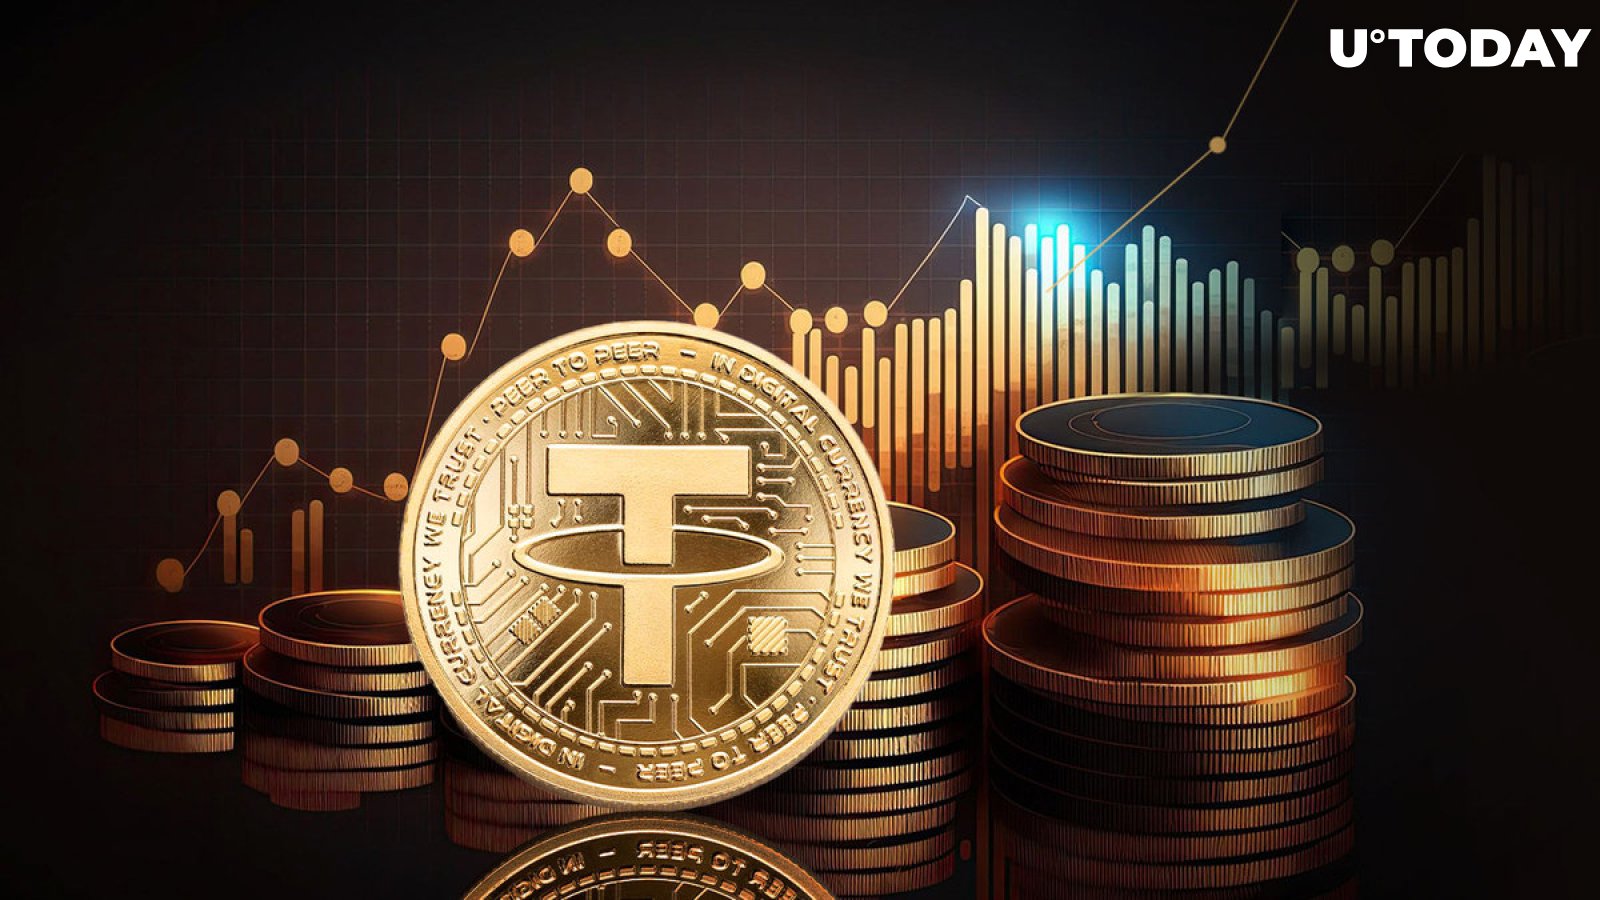 Tether Injects 1 Billion USDT More as Bitcoin Halving Almost Here